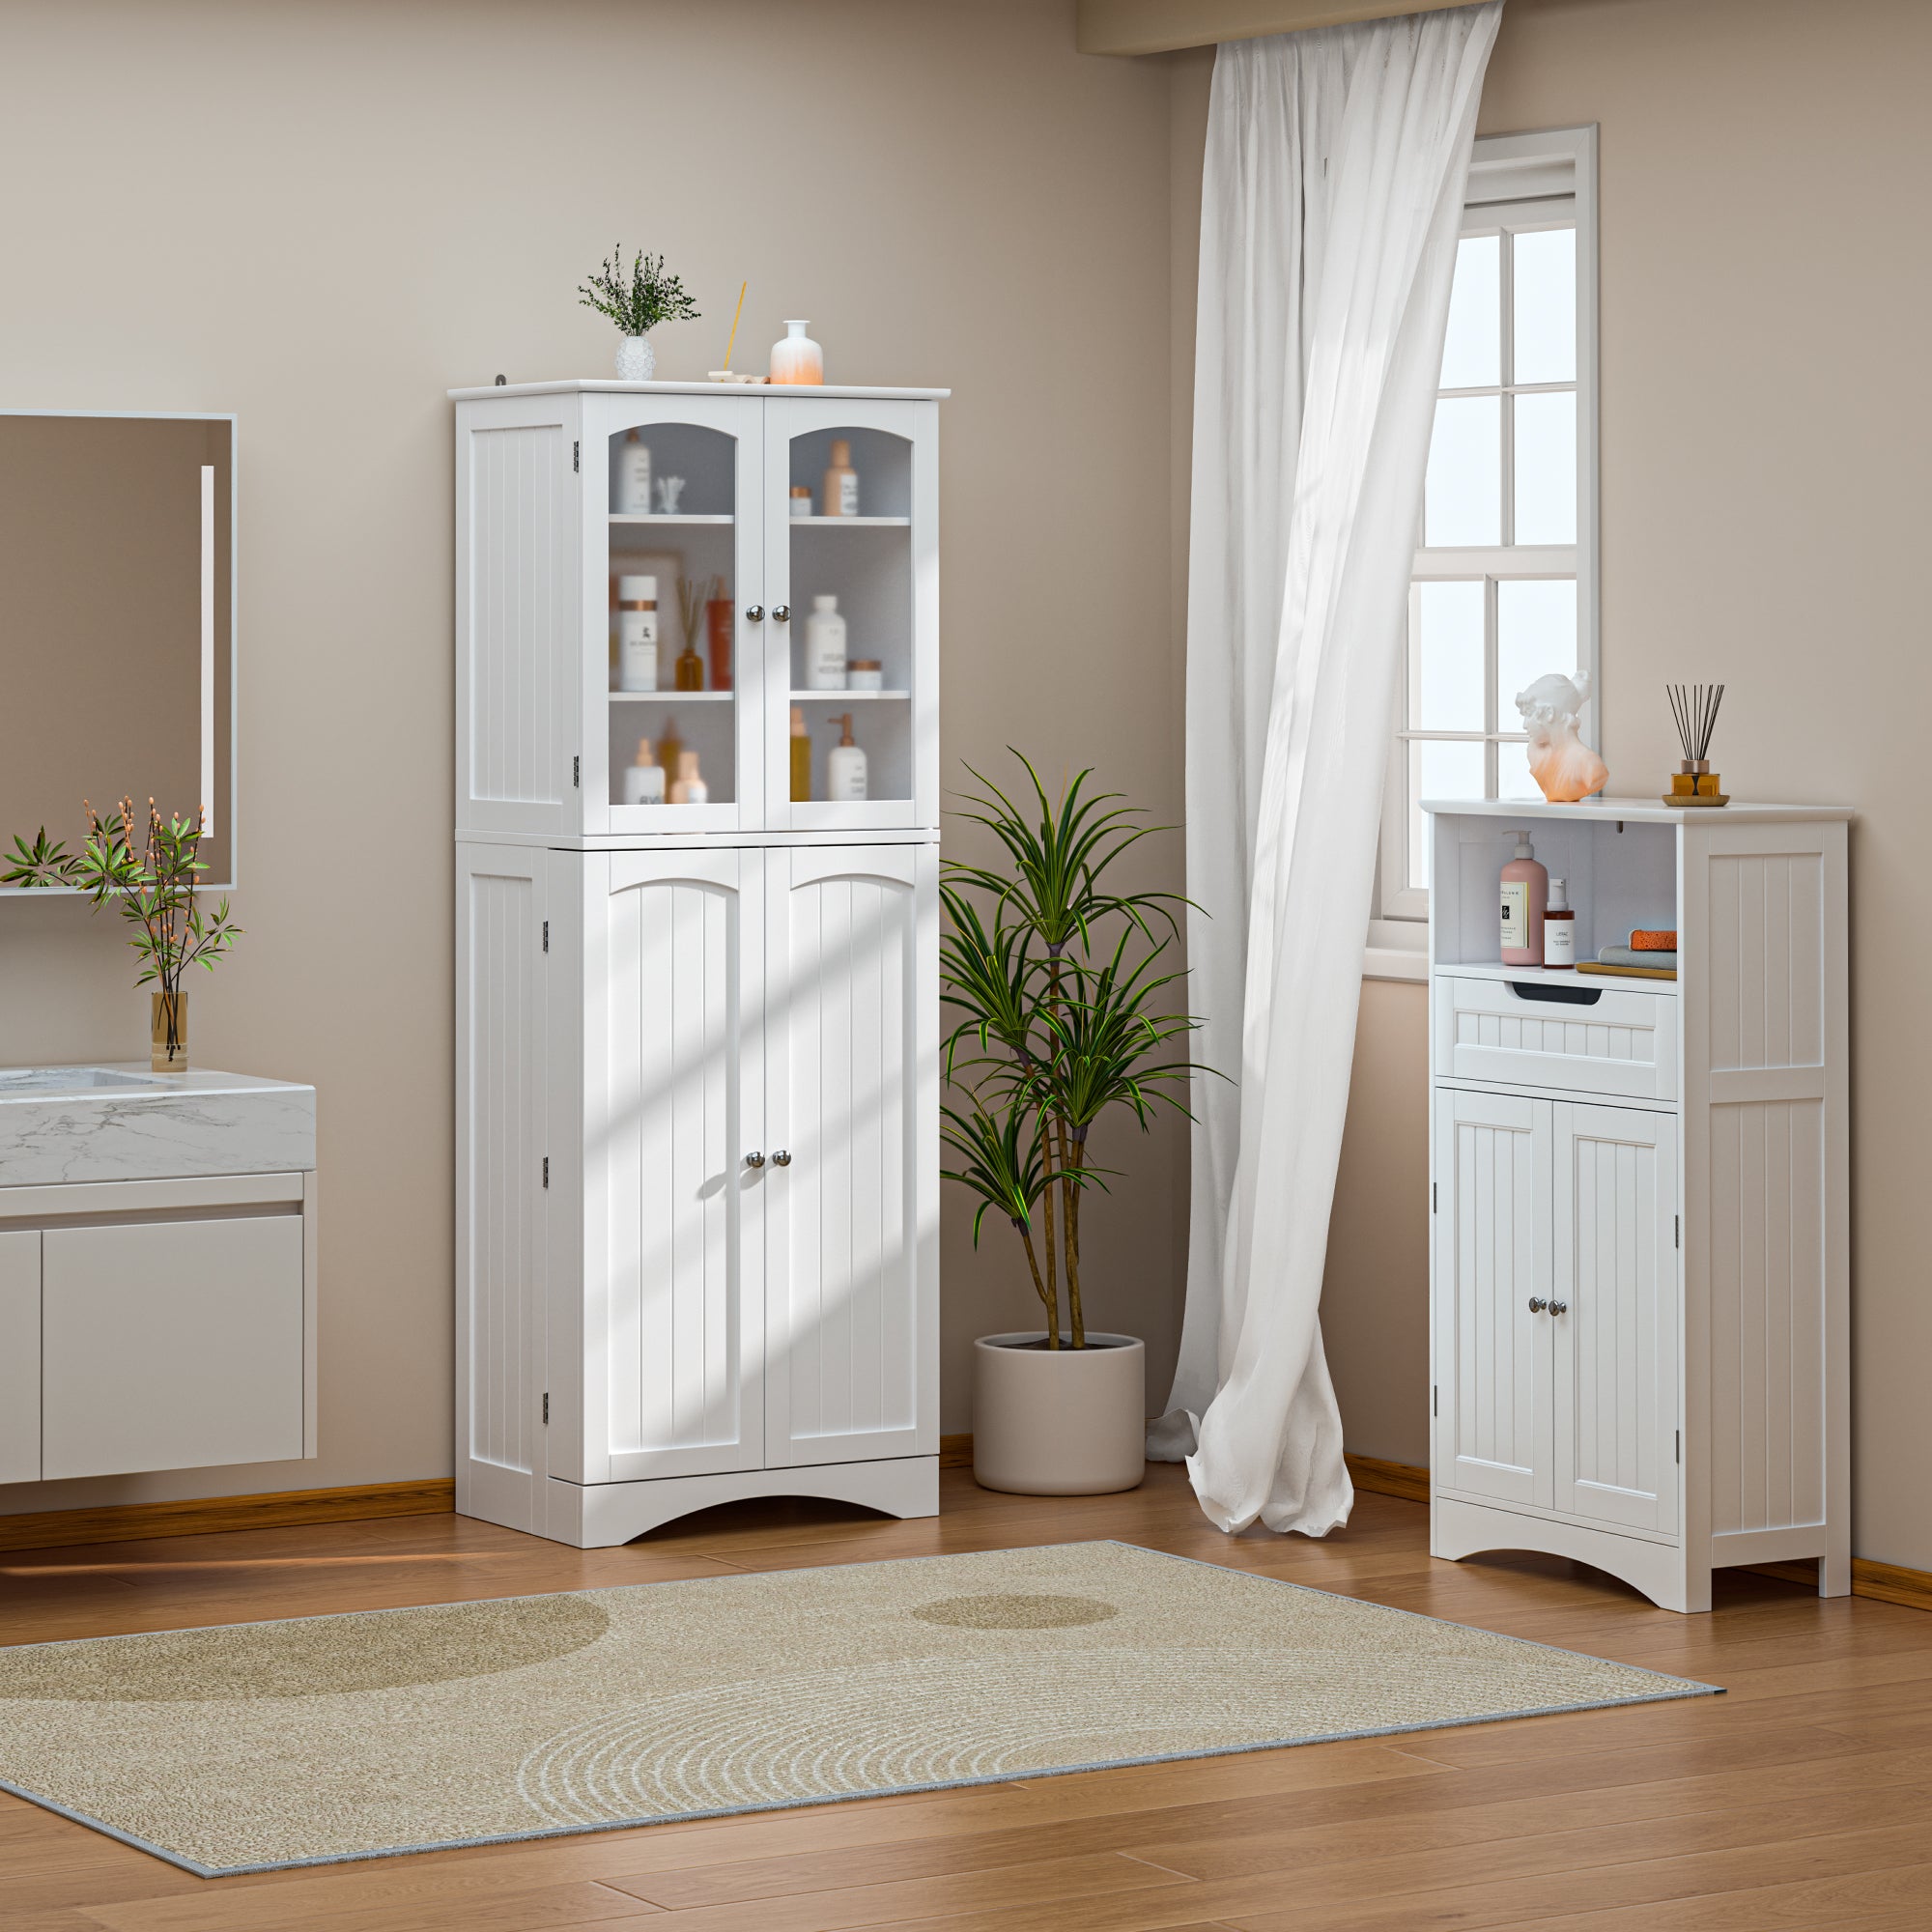  Gizoon 33 Small Kitchen Pantry Storage Cabinet with Door and  Shelves, Pantry Cabinet Storage Cupboard, Freestanding Wooden Dresser with  4 Drawers for Bedroom Bathroom and Dining Room, White : Home 